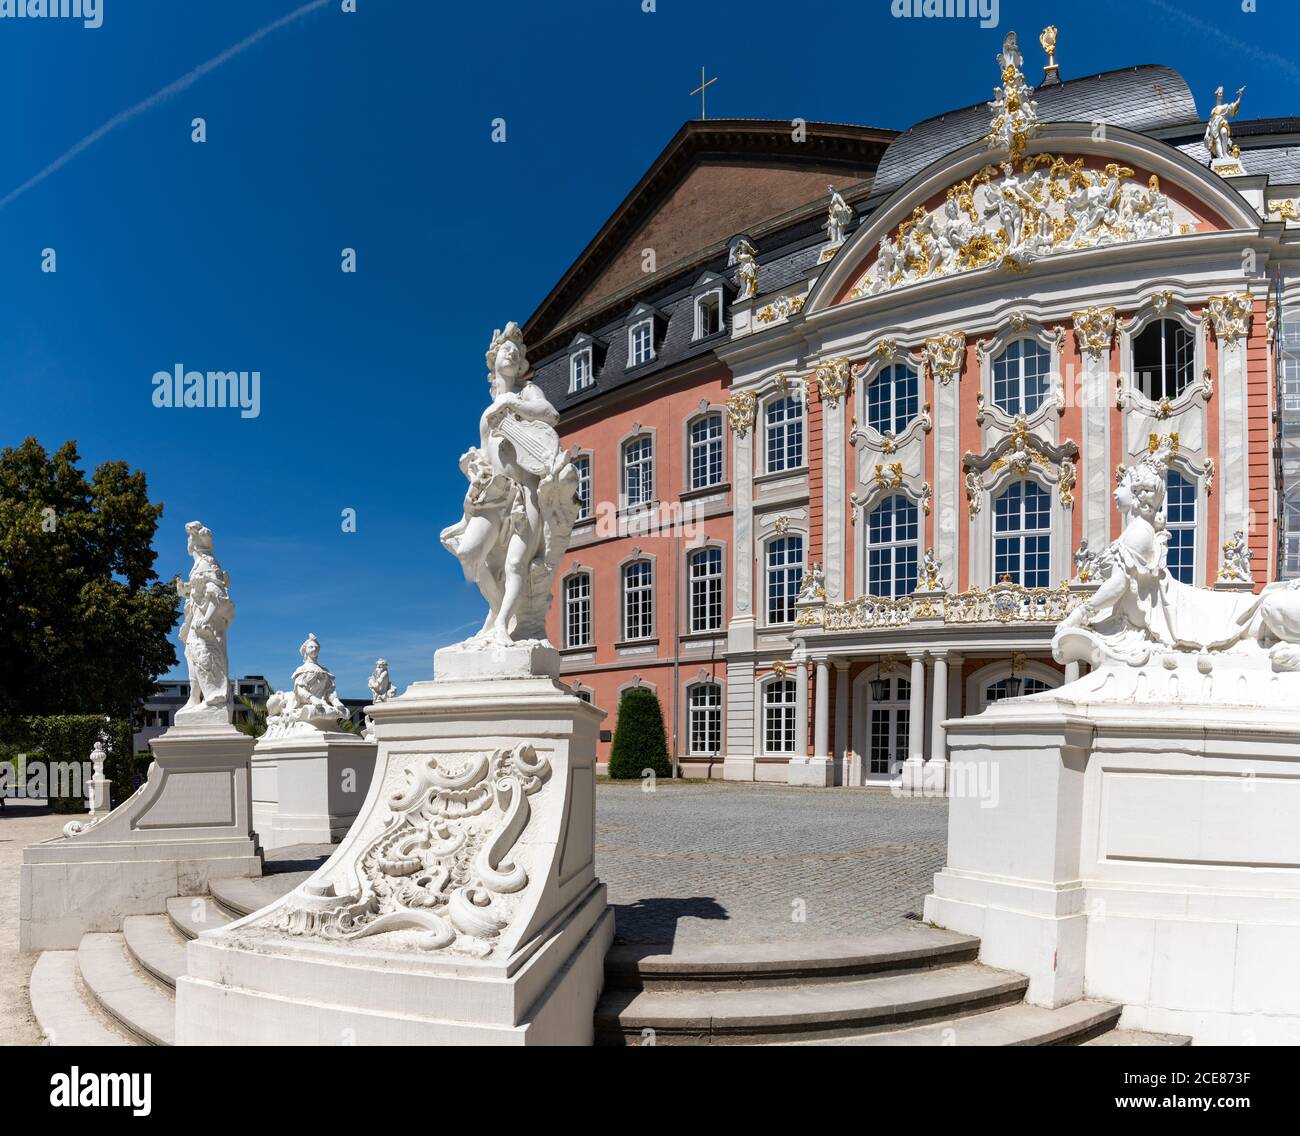 Trier, RP / Germany - 29 July 2020: the palace at the Konstantin Basilica in the historic old town of Trier Stock Photo